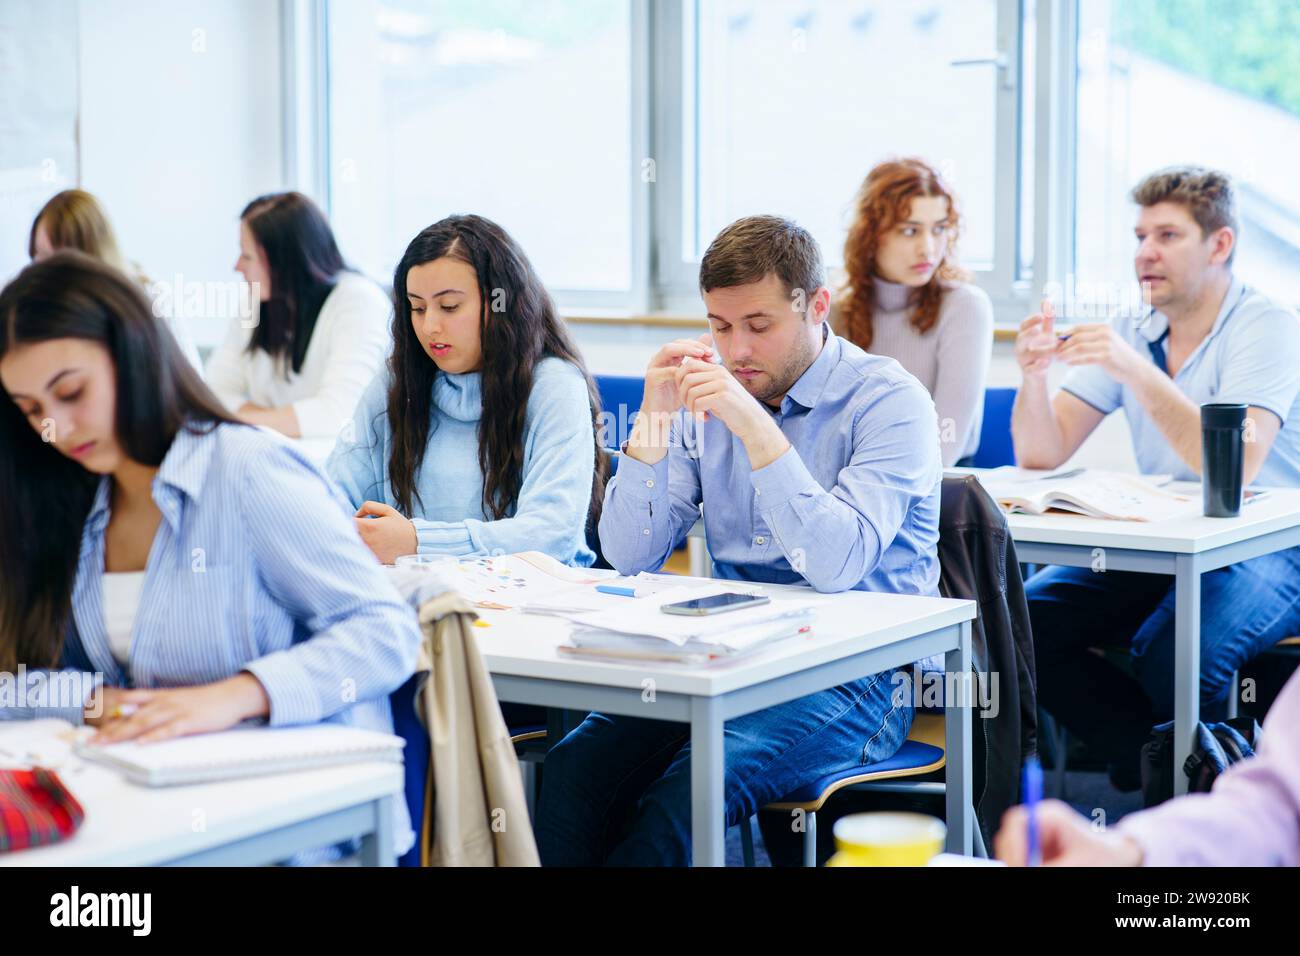 Multi-ethnic students studying at desk in classroom Stock Photo